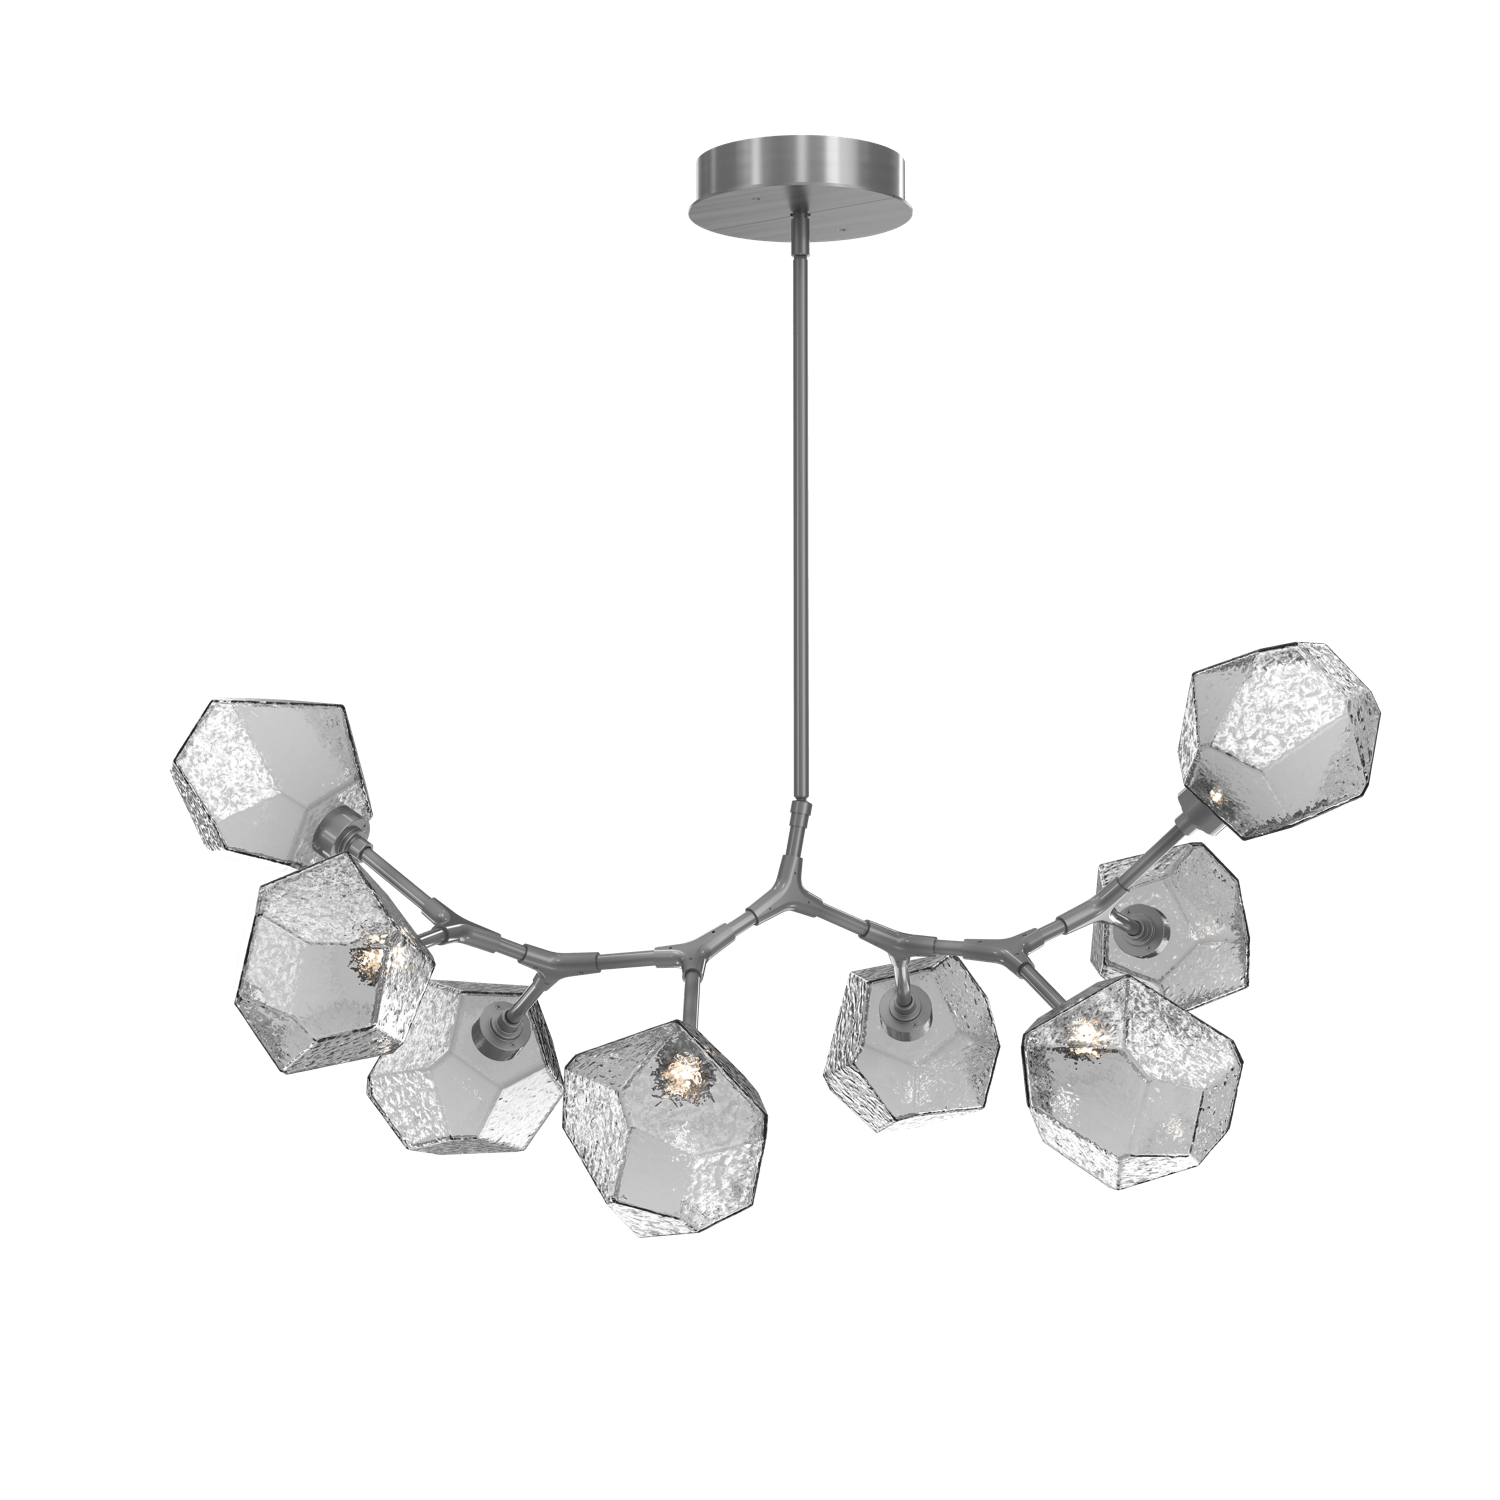 PLB0039-BB-SN-S-Hammerton-Studio-Gem-8-light-modern-branch-chandelier-with-satin-nickel-finish-and-smoke-blown-glass-shades-and-LED-lamping